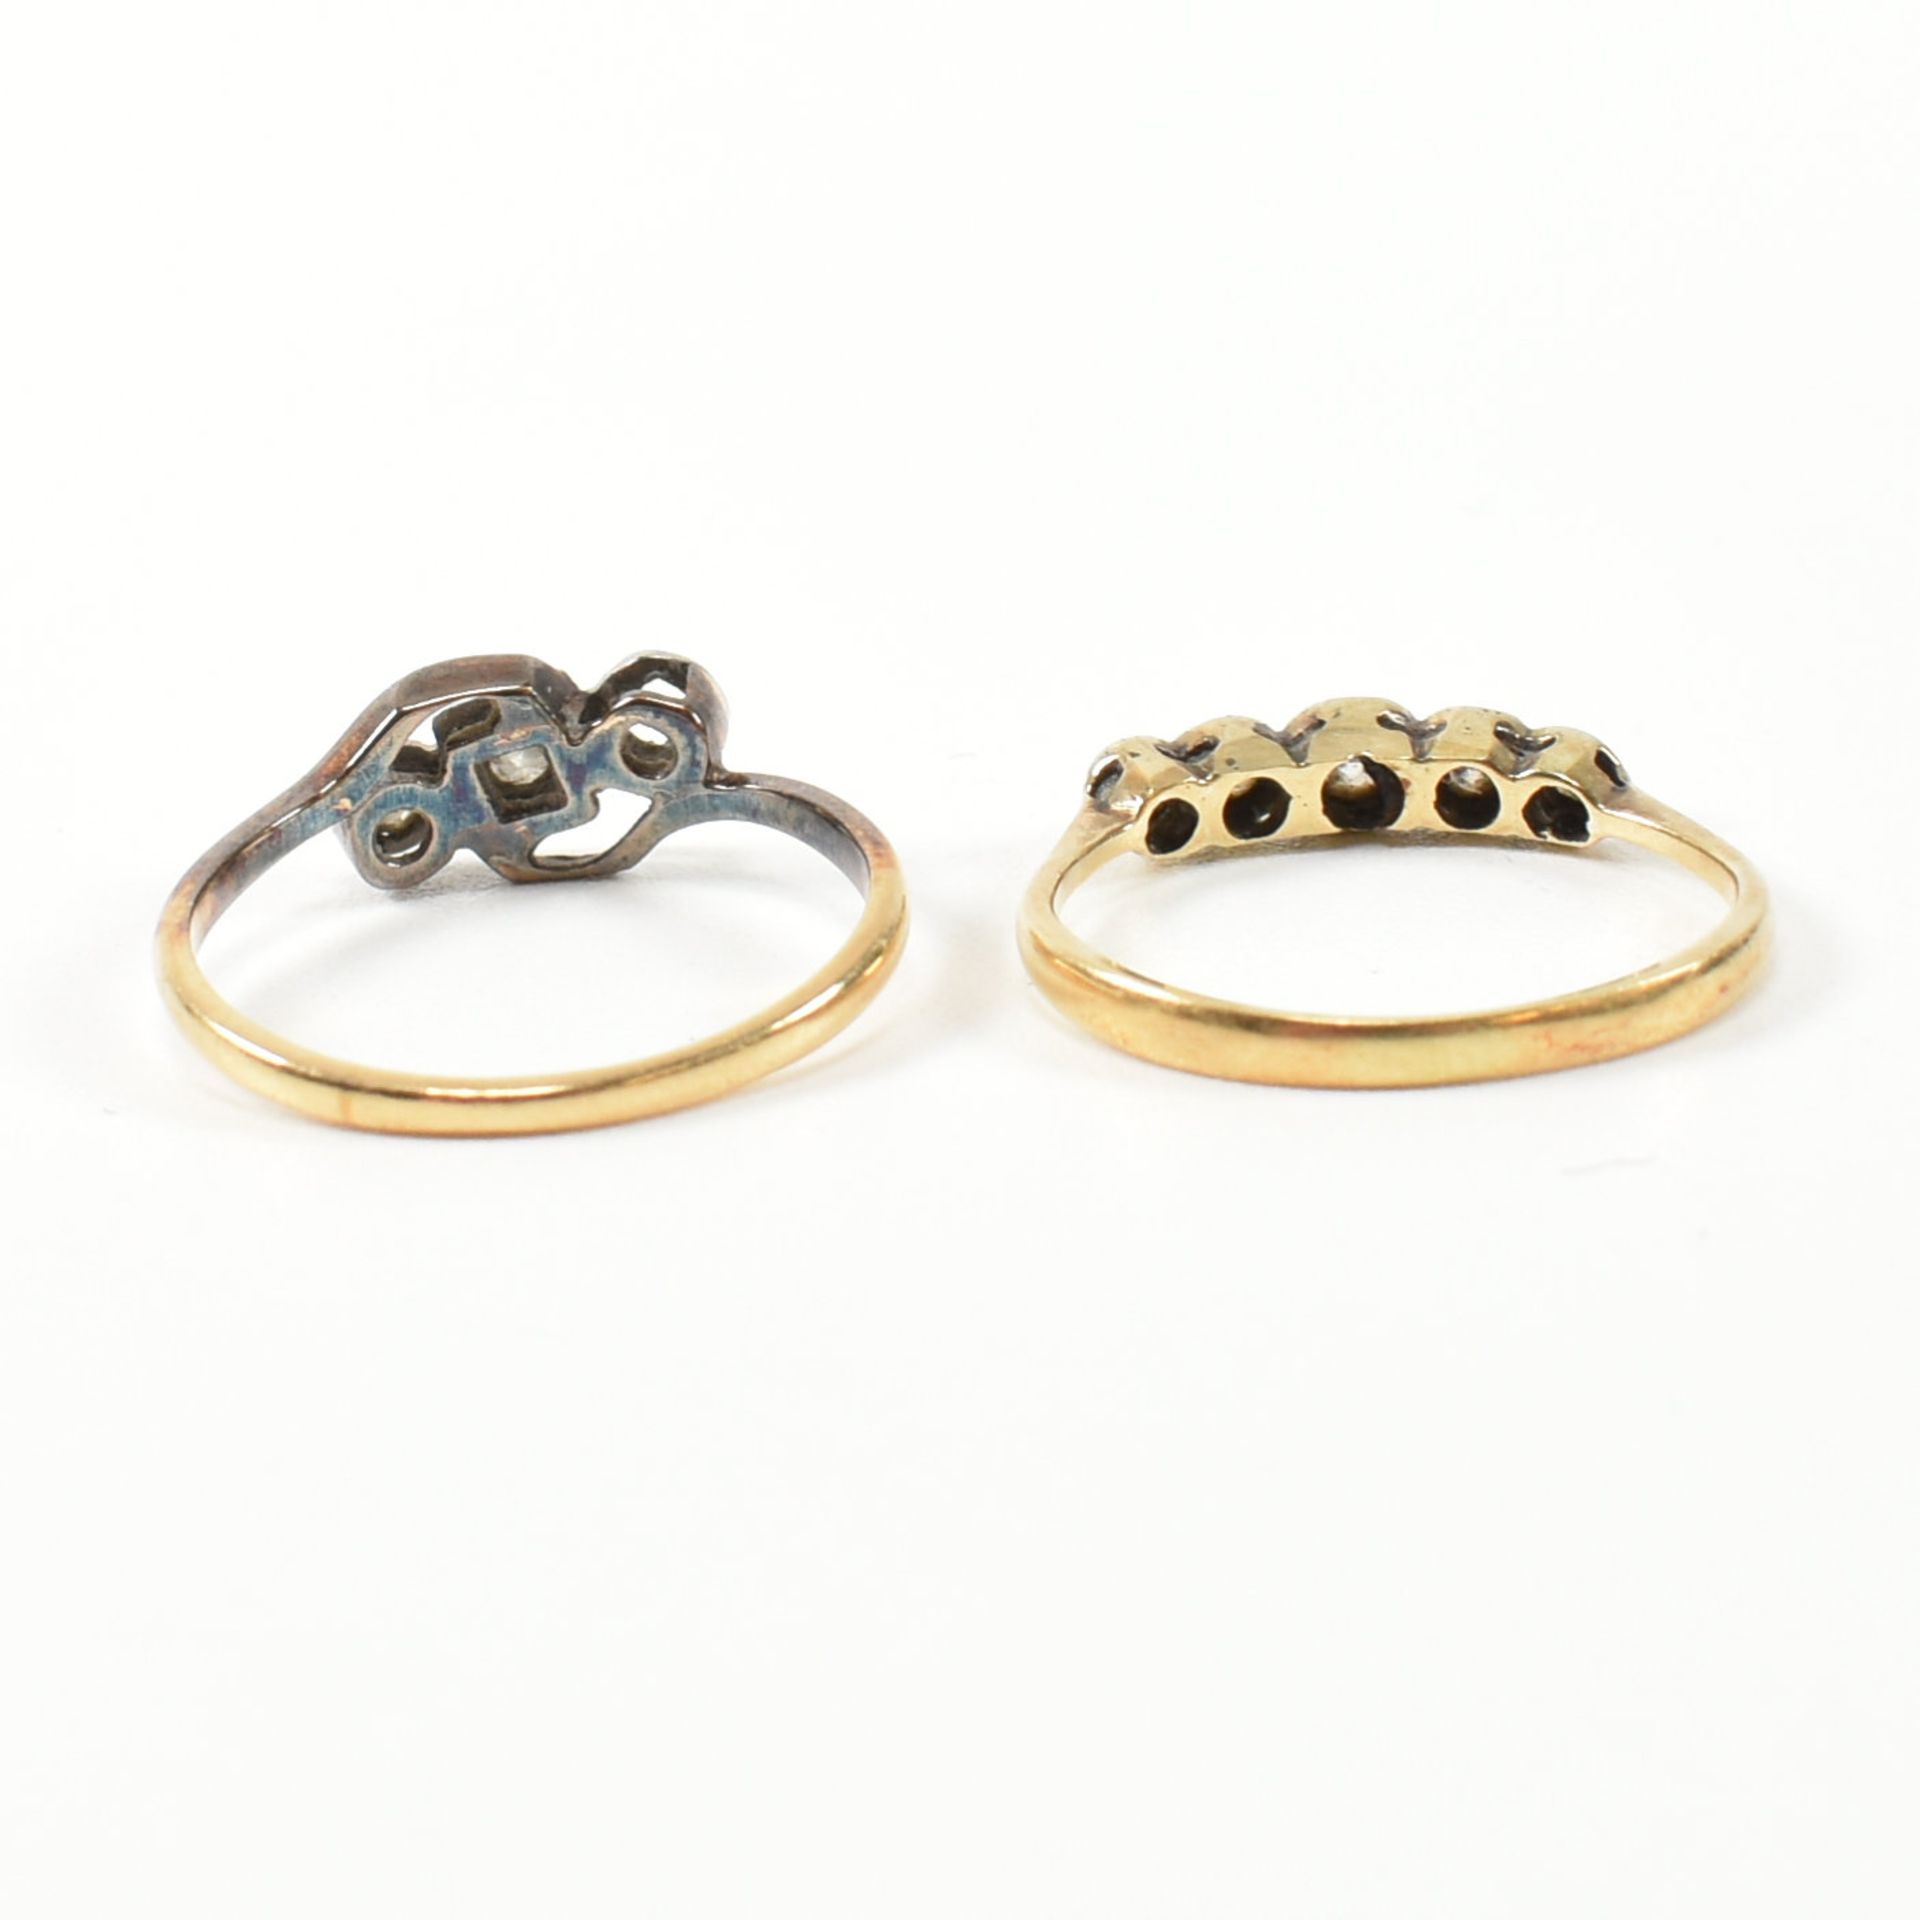 TWO 18CT GOLD & DIAMOND RINGS - Image 4 of 8